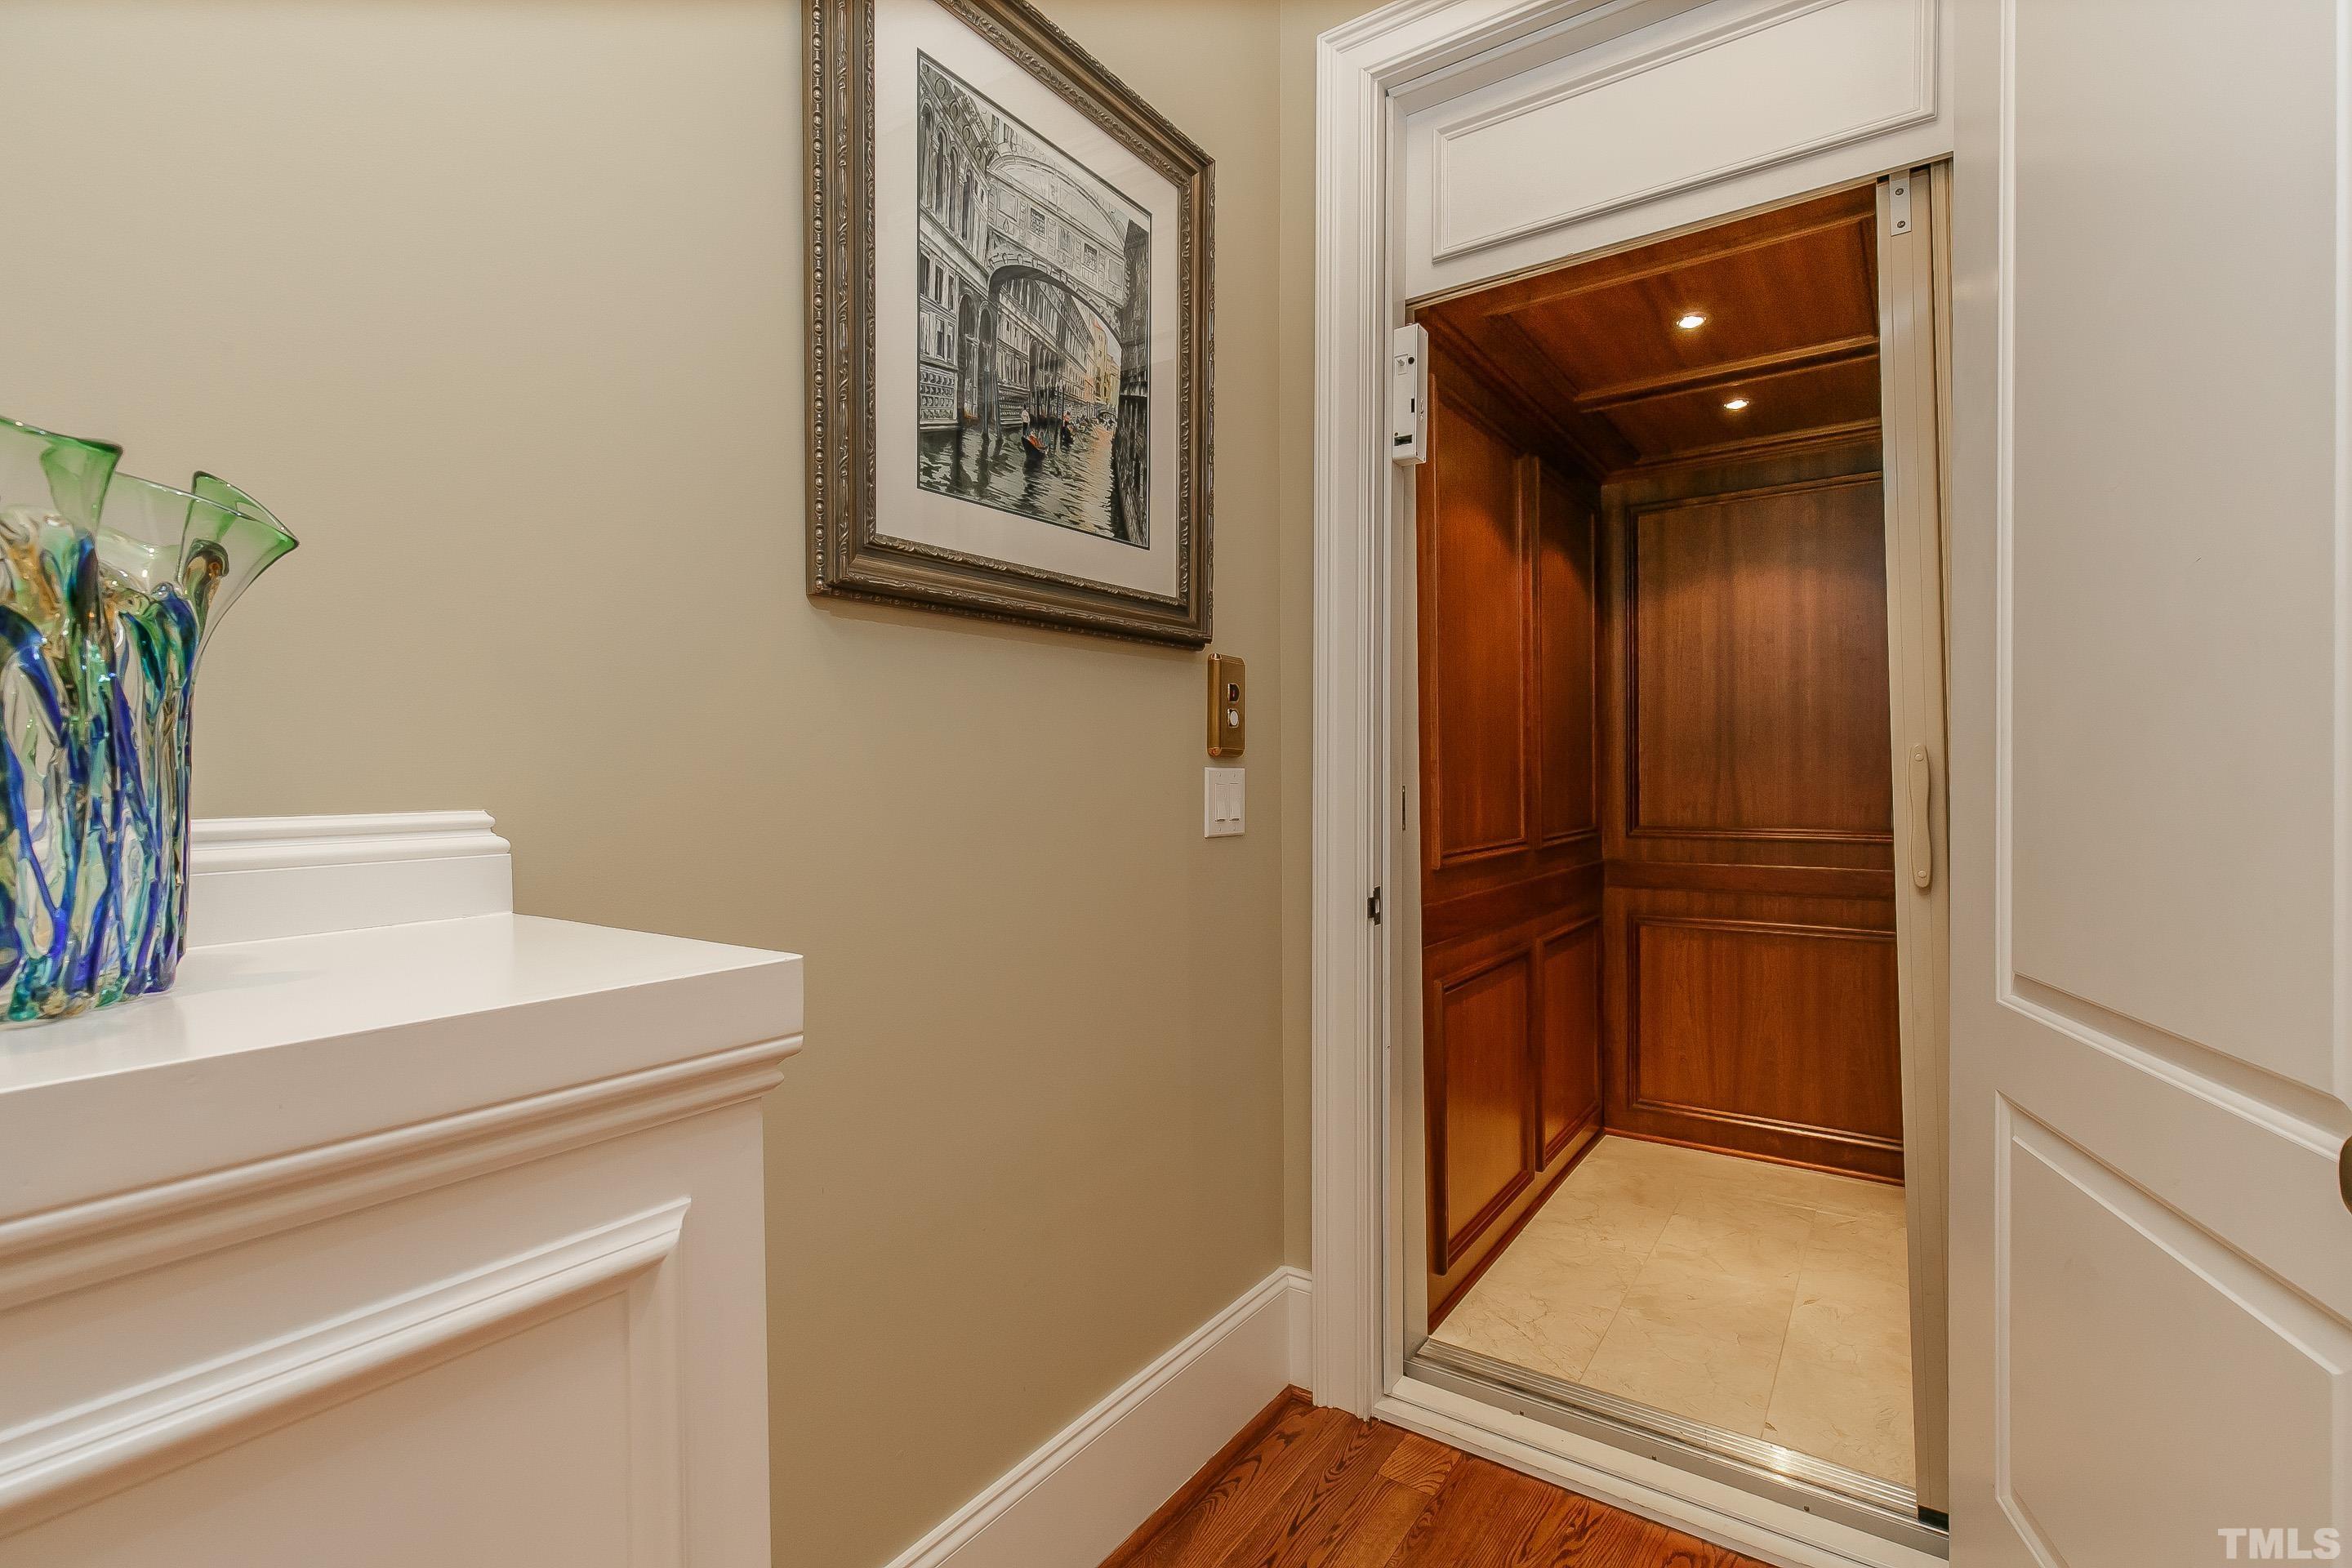 Elevator with mahogany and recessed lights make this home easily accessible